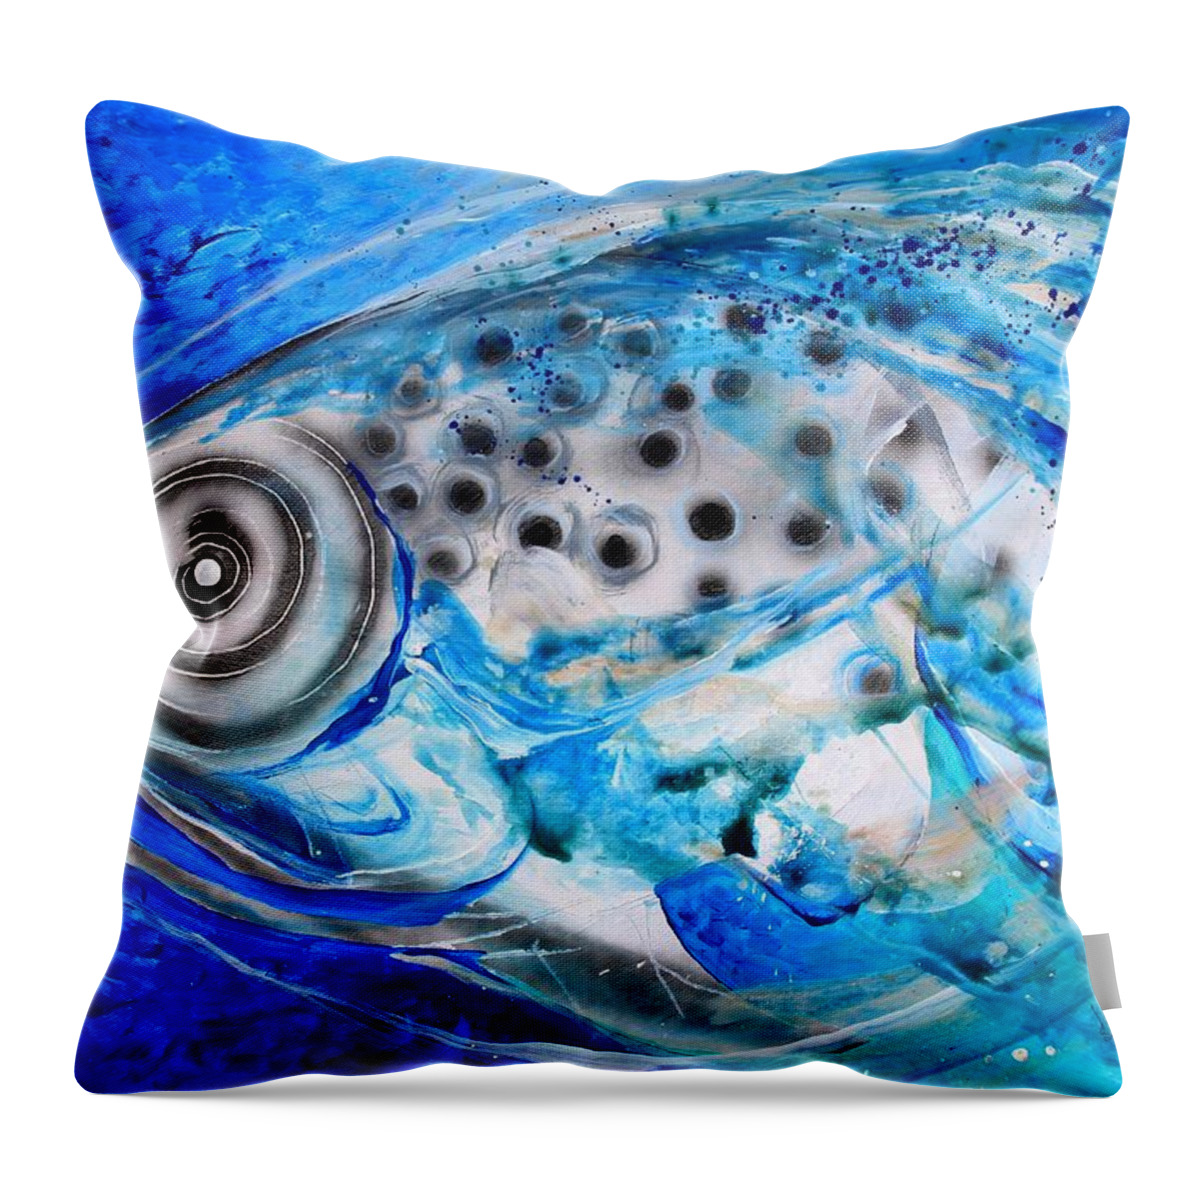 Fishart Throw Pillow featuring the painting Sincerity, Recycled by J Vincent Scarpace